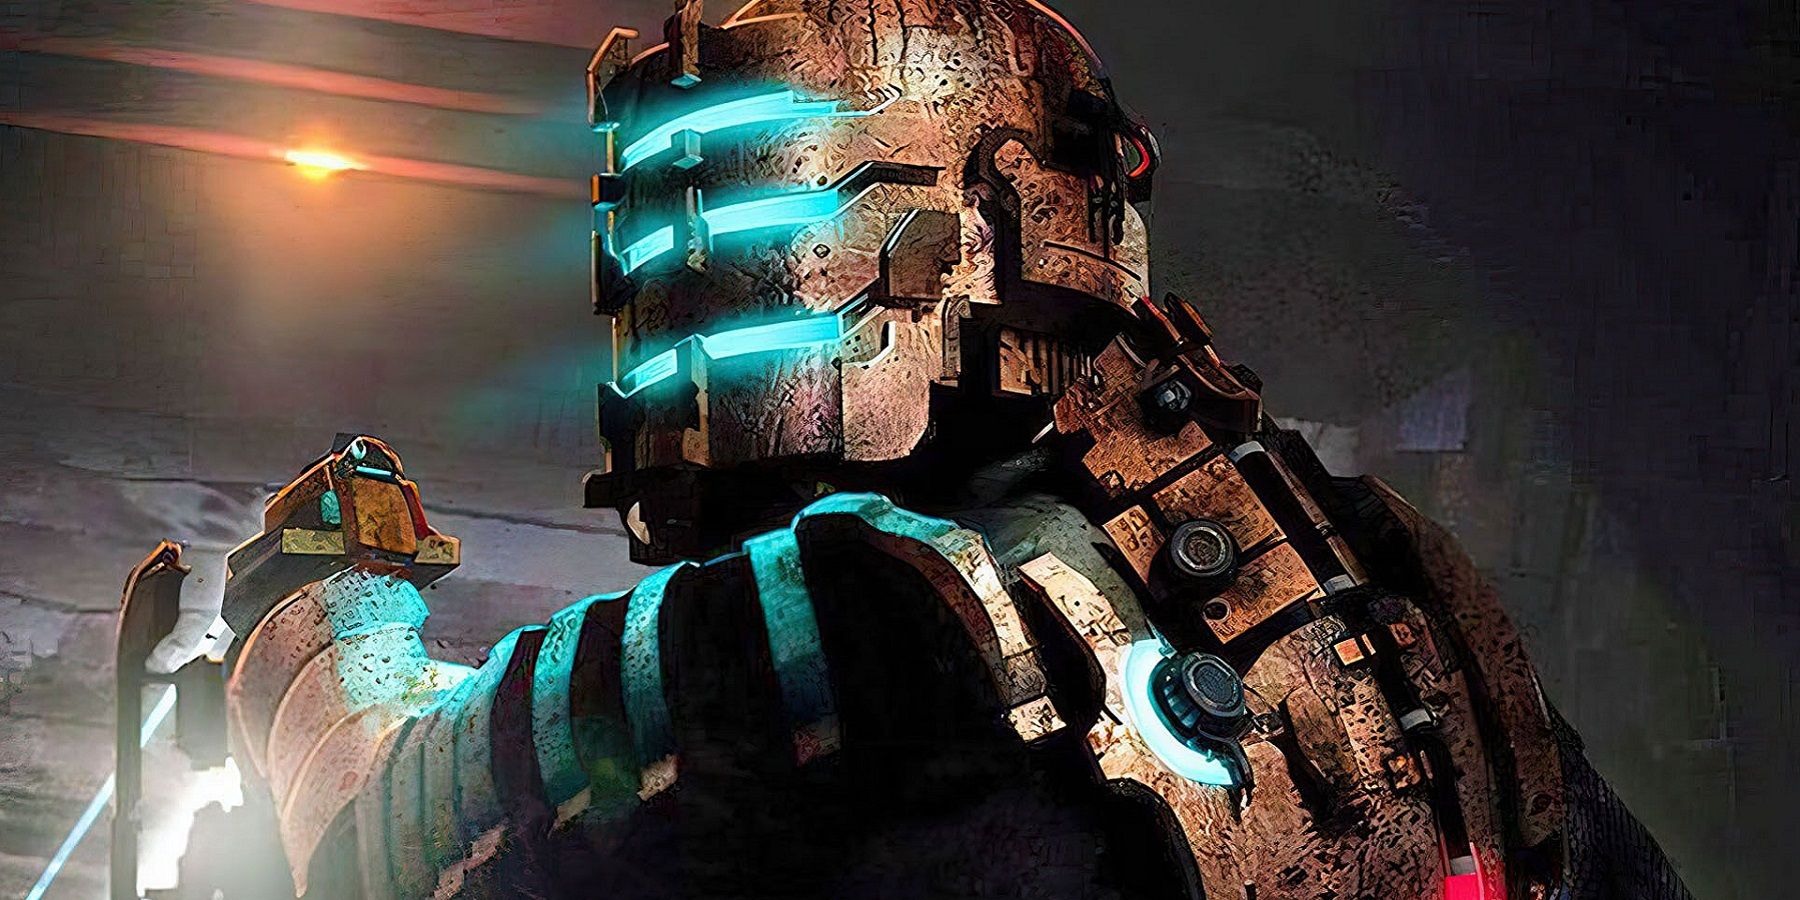 Image from the remake of Dead Space remake showing Isaac Clarke with his back to the camera.